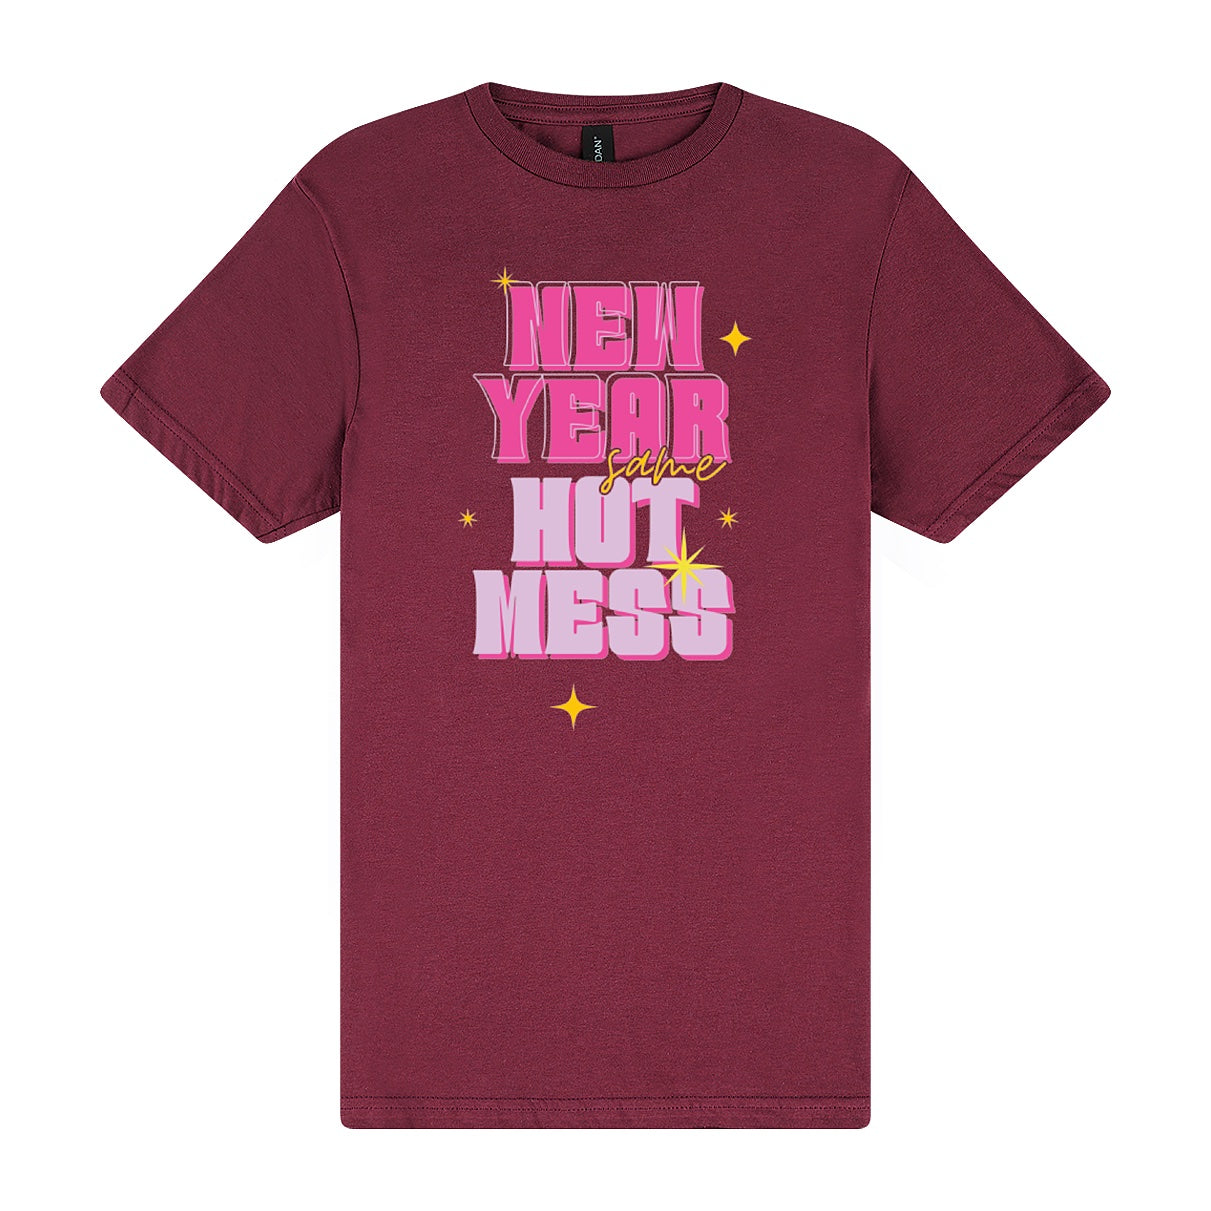 New year, same hot mess Softstyle Tee